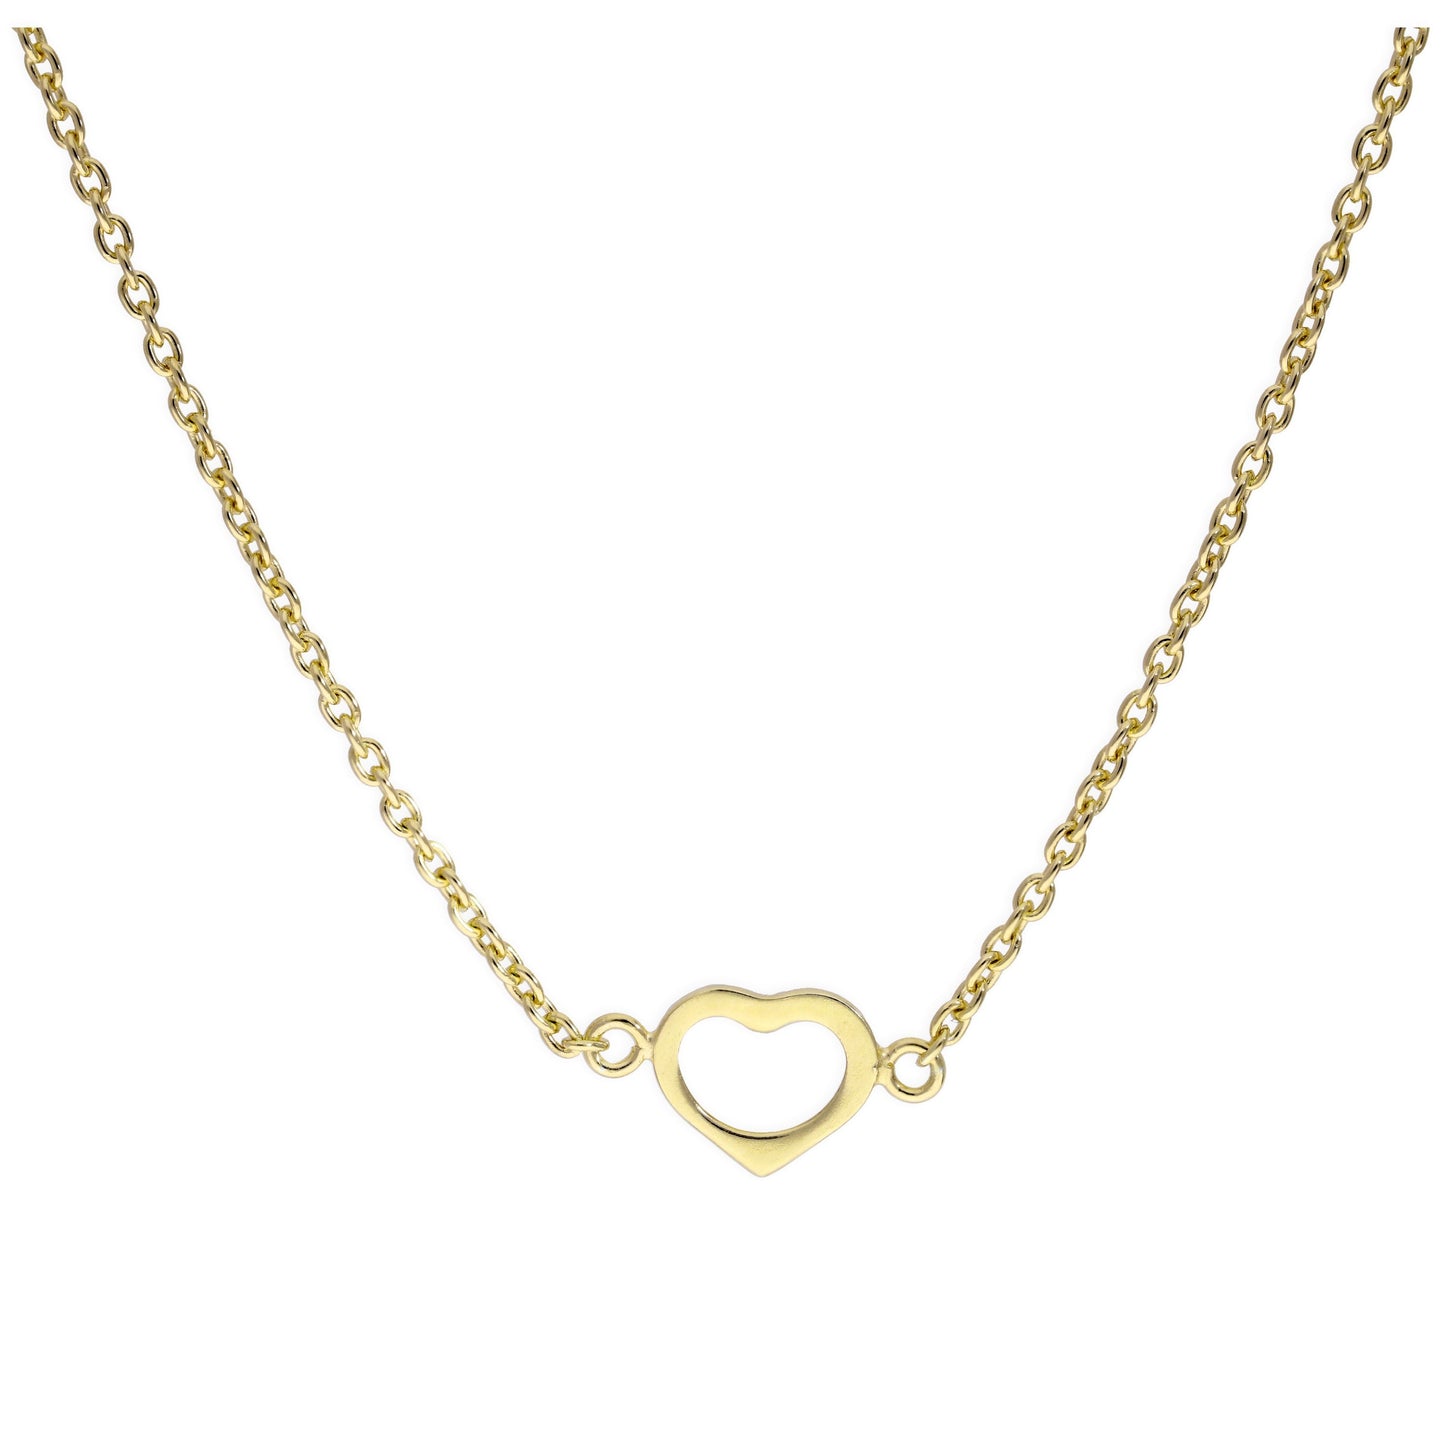 Gold Plated Sterling Silver Heart Outline 18 Inch Necklace